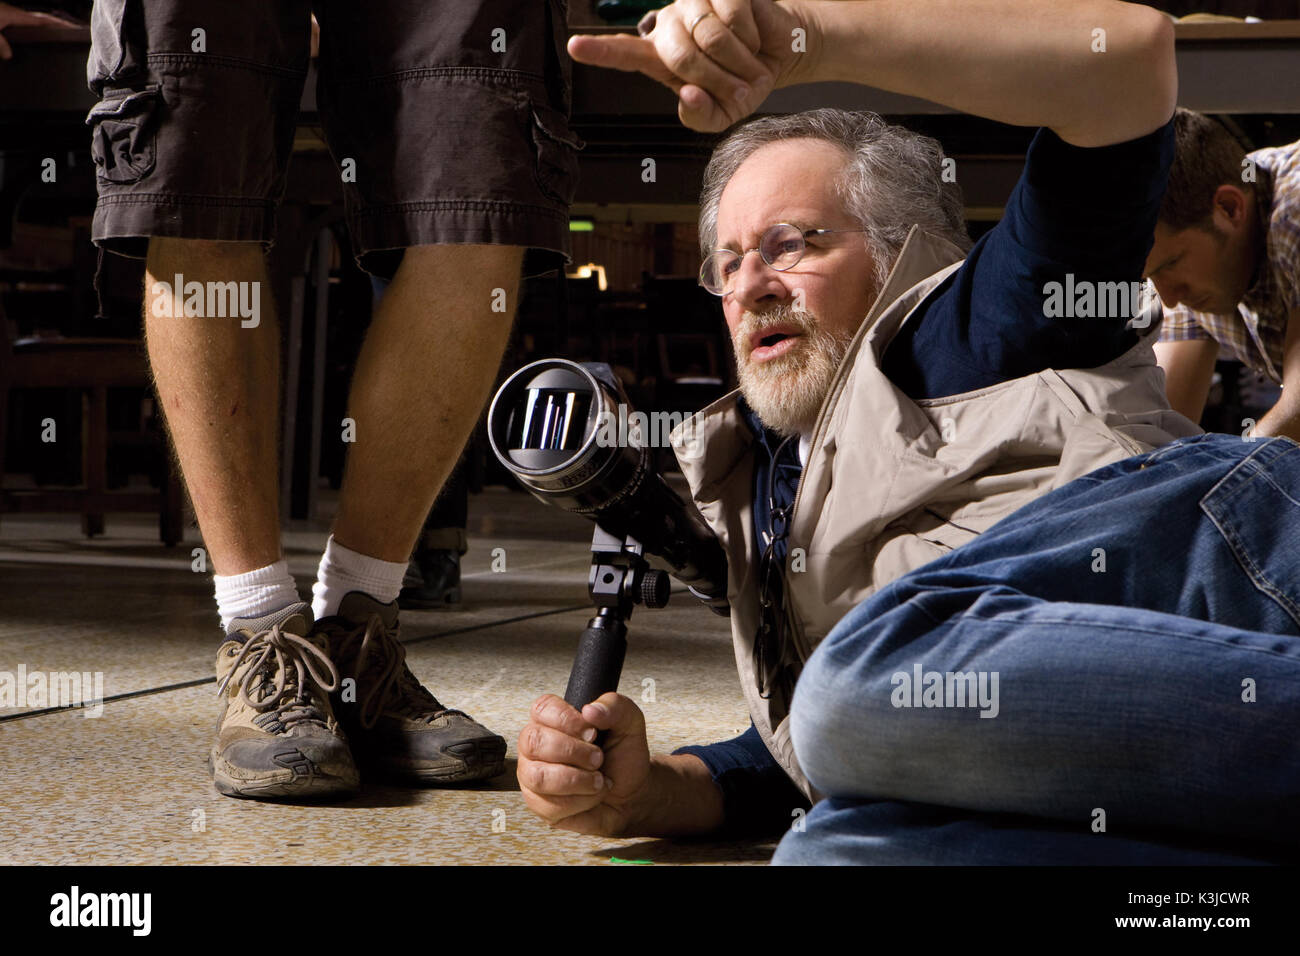 INDIANA JONES AND THE KINGDOM OF THE CRYSTAL SKULL Director STEVEN SPIELBERG     Date: 2008 Stock Photo